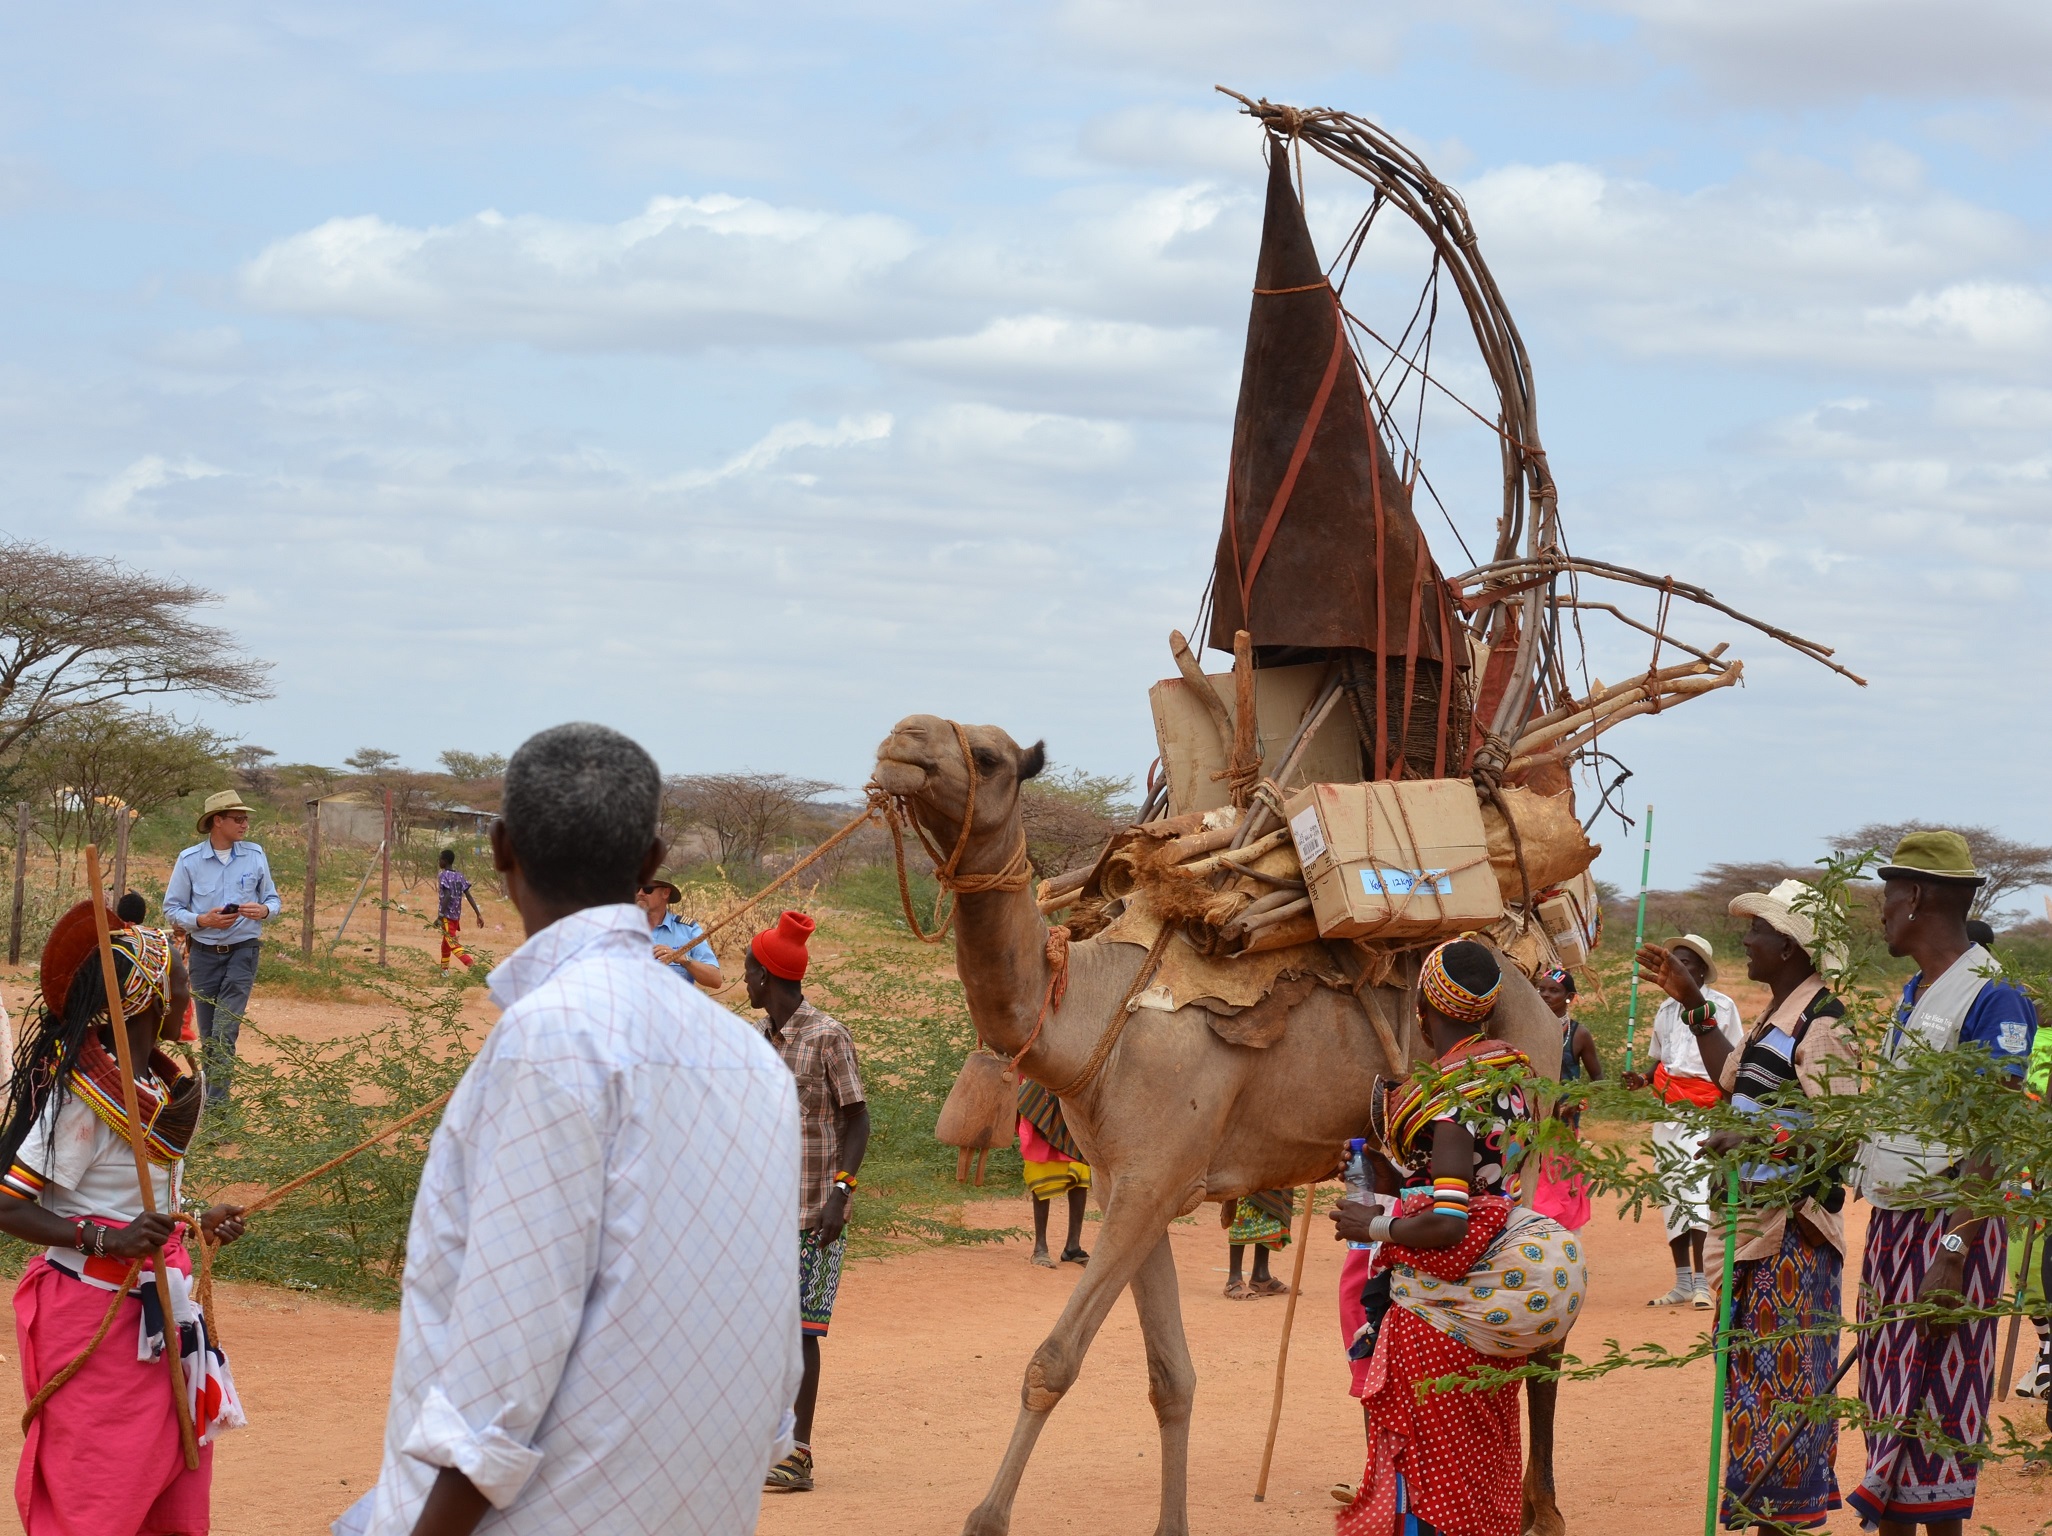 Guests from Kenya and beyond to witness the ‘Bible’s’ return by their treasured animal, the camel.